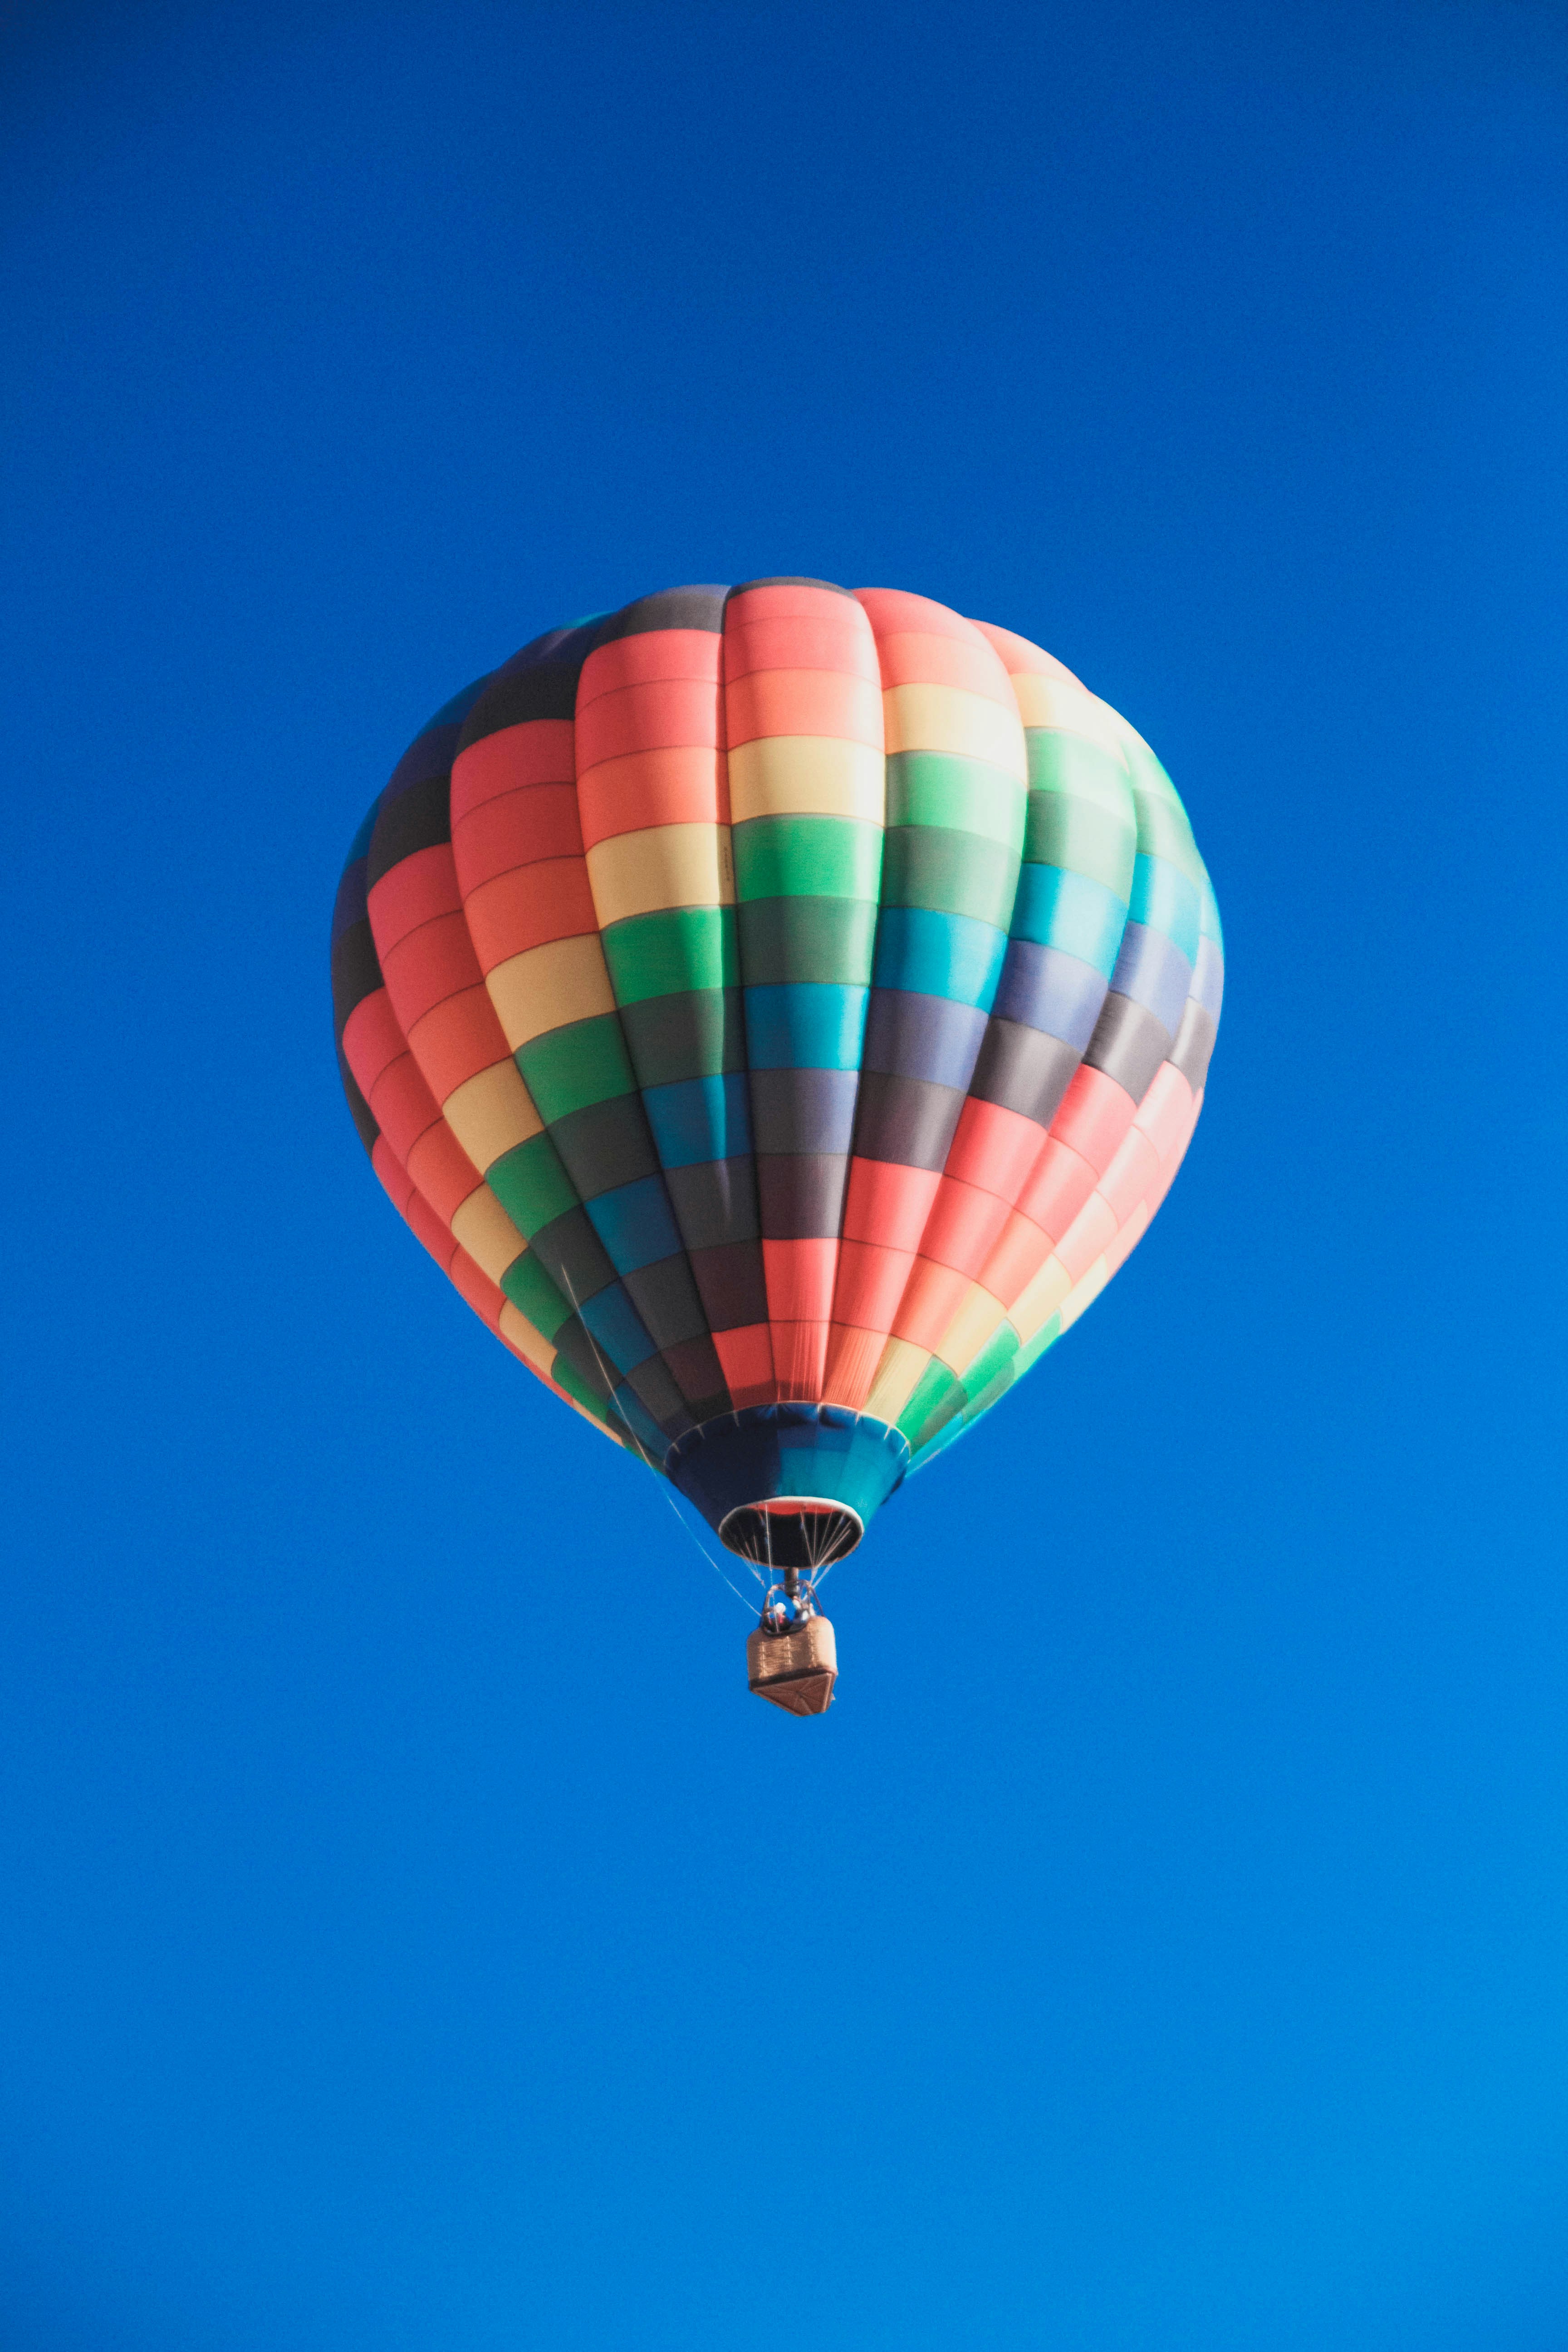 My girlfriend pretty much threw me into my car without telling me where we were going, it was the early morning and I had no idea where we were. After an hour and a half of driving, much to my surprise, I was greeted by fifty different hot air balloons. Luckily for me, I had my camera and was able to take a couple shots before they flew away!